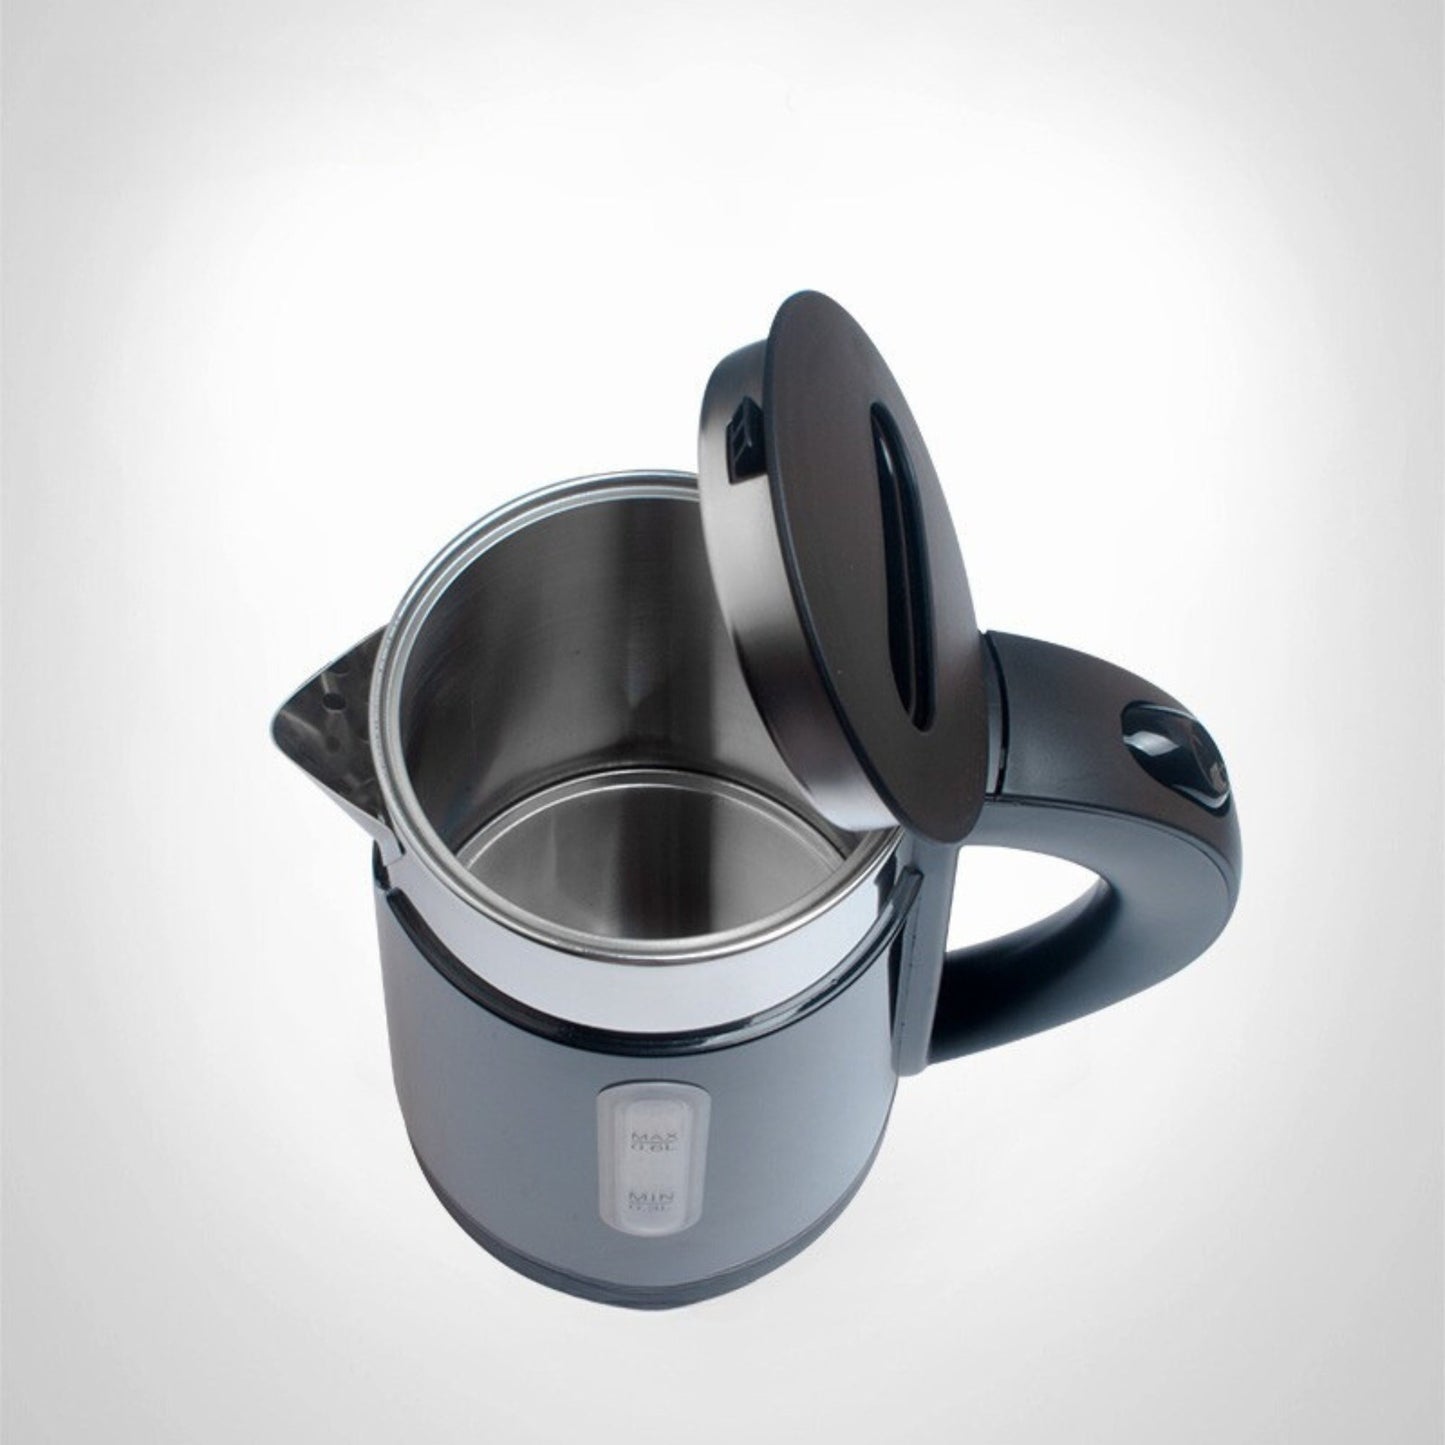 0.6L Stainless Steel Electric Kettle Black